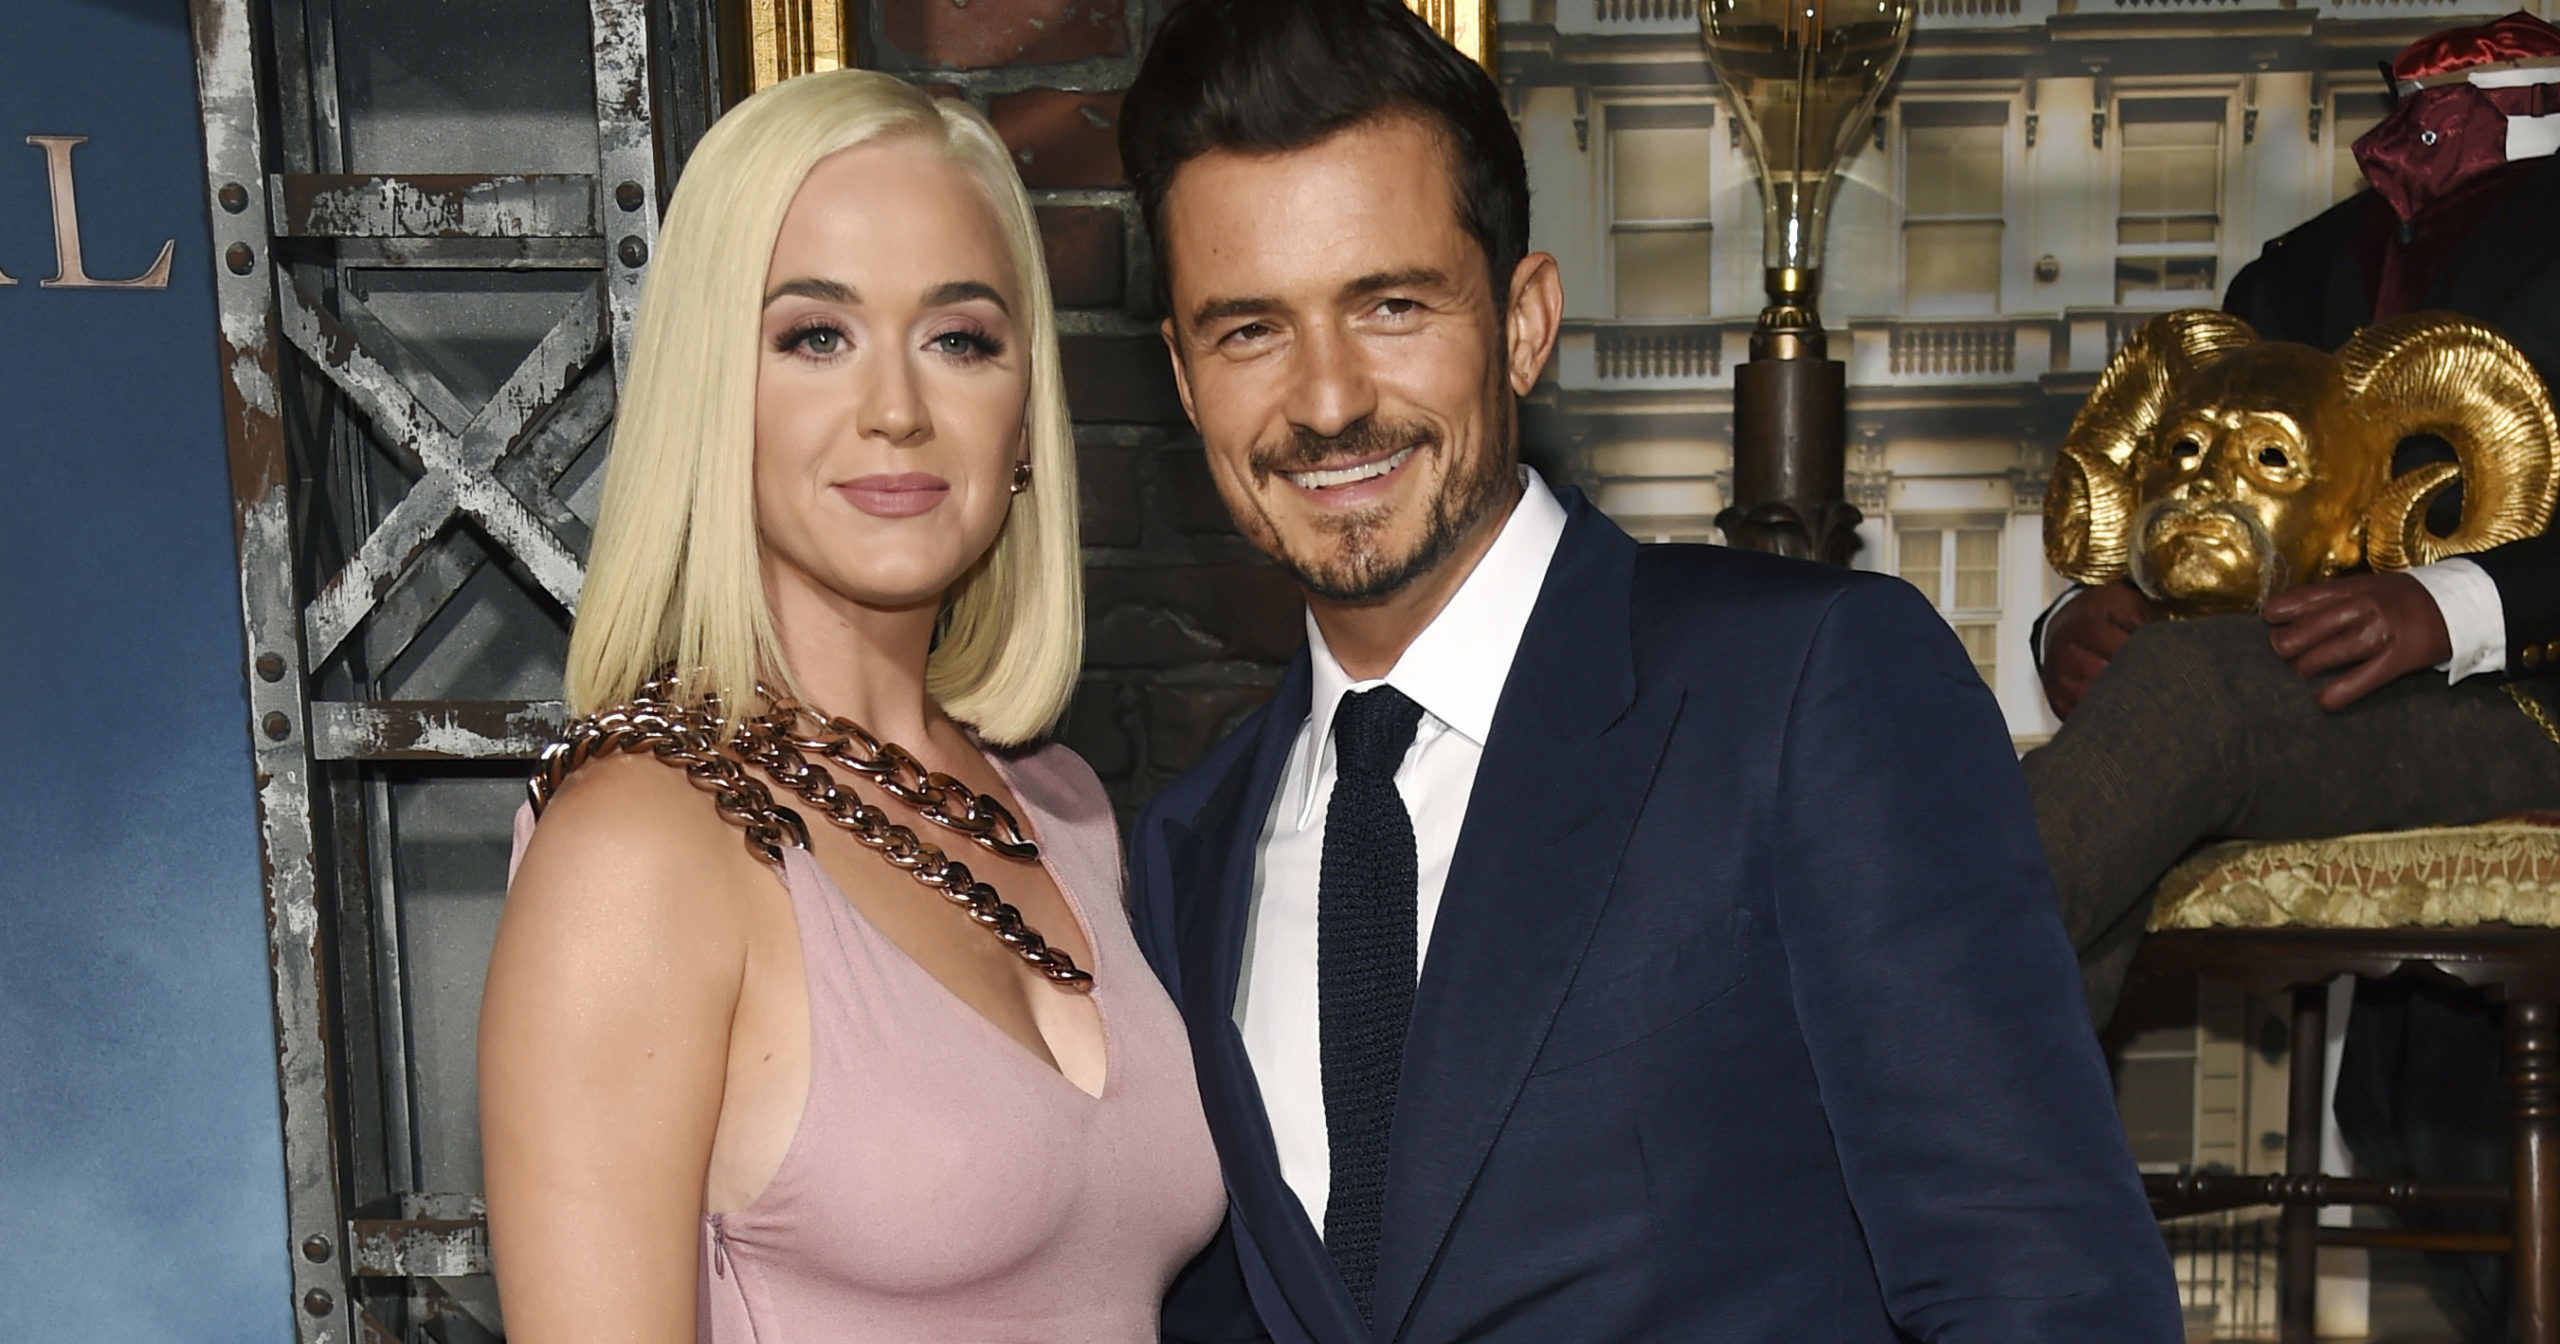 This Aug. 21, 2019, file photo shows Orlando Bloom, right, a cast member in the Amazon Prime Video series "Carnival Row," with singer Katy Perry at the premiere of the series in Los Angeles. Perry has given birth to a baby girl named Daisy Dove Bloom. The pop superstar and her partner, actor Orlando Bloom, got UNICEF to announce the news on its social media accounts. Both Perry and Bloom are goodwill ambassadors for the United Nations agency that helps children.